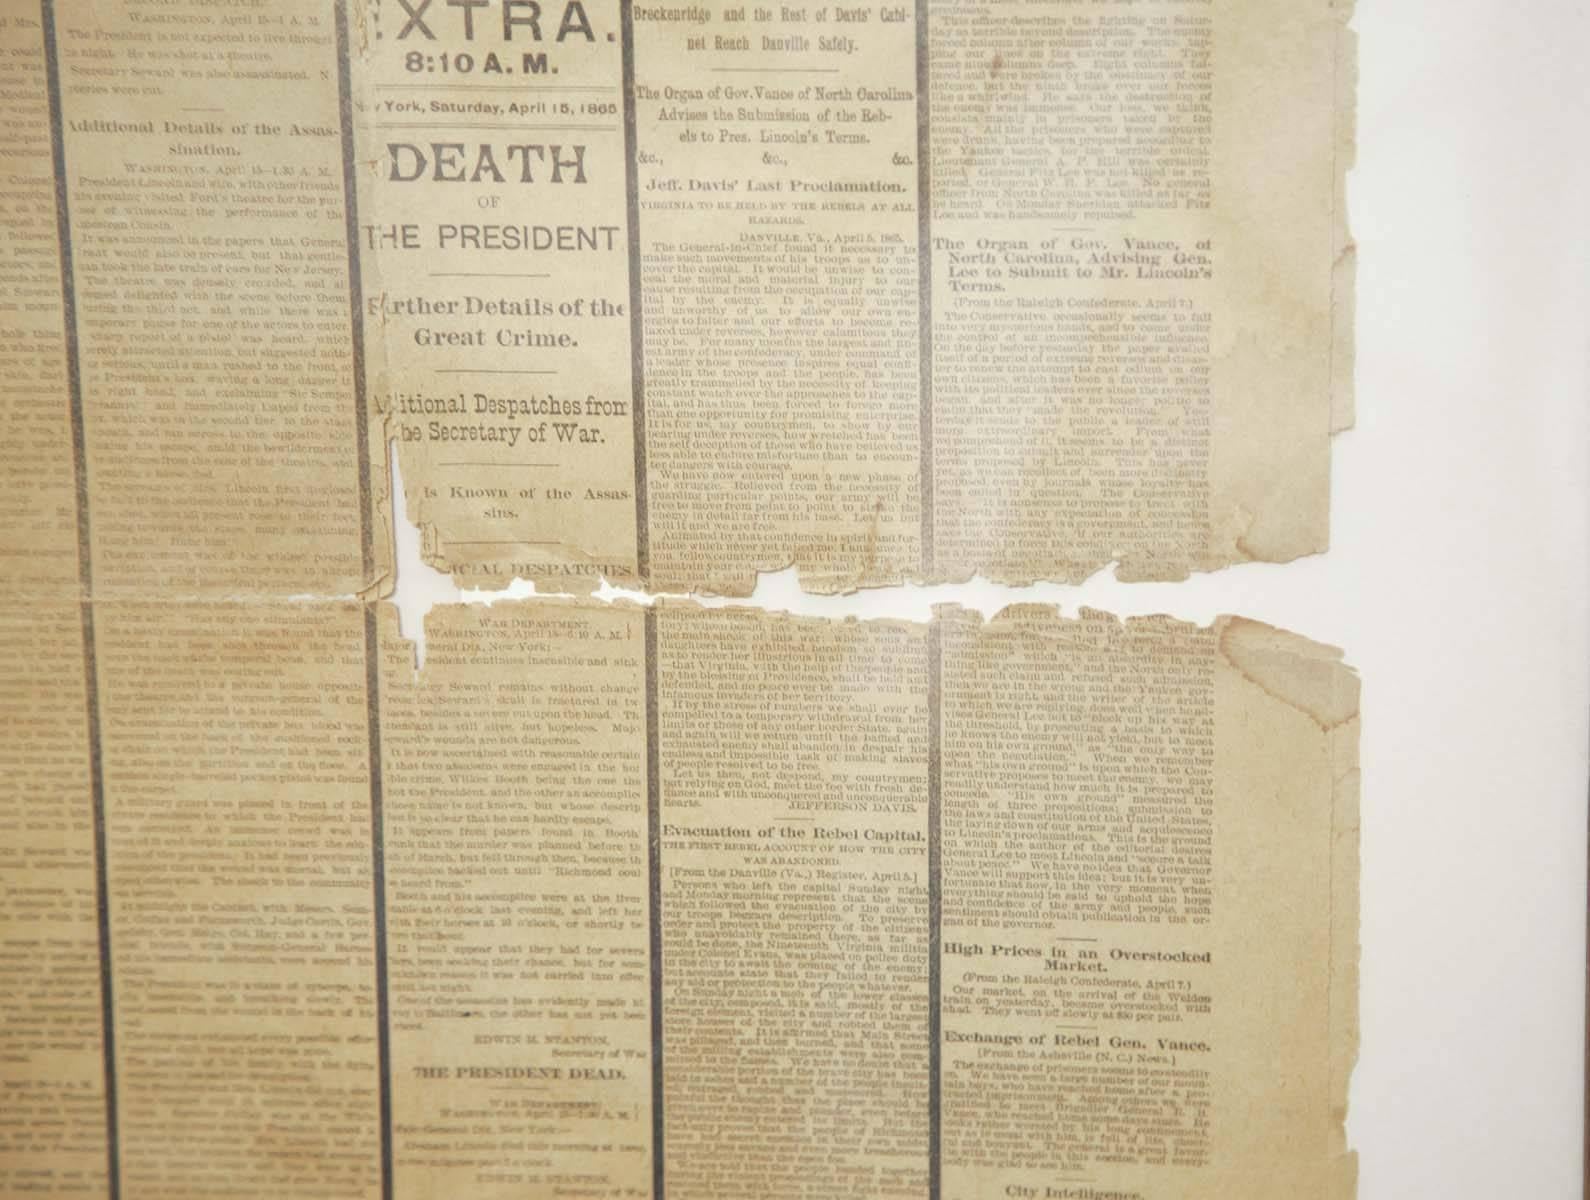 New York Herald front page Lincoln April 15 1865, condition is as shown some wear and tear but you can read it for the most part. This is an original news paper not a copy. Framed with glass. 